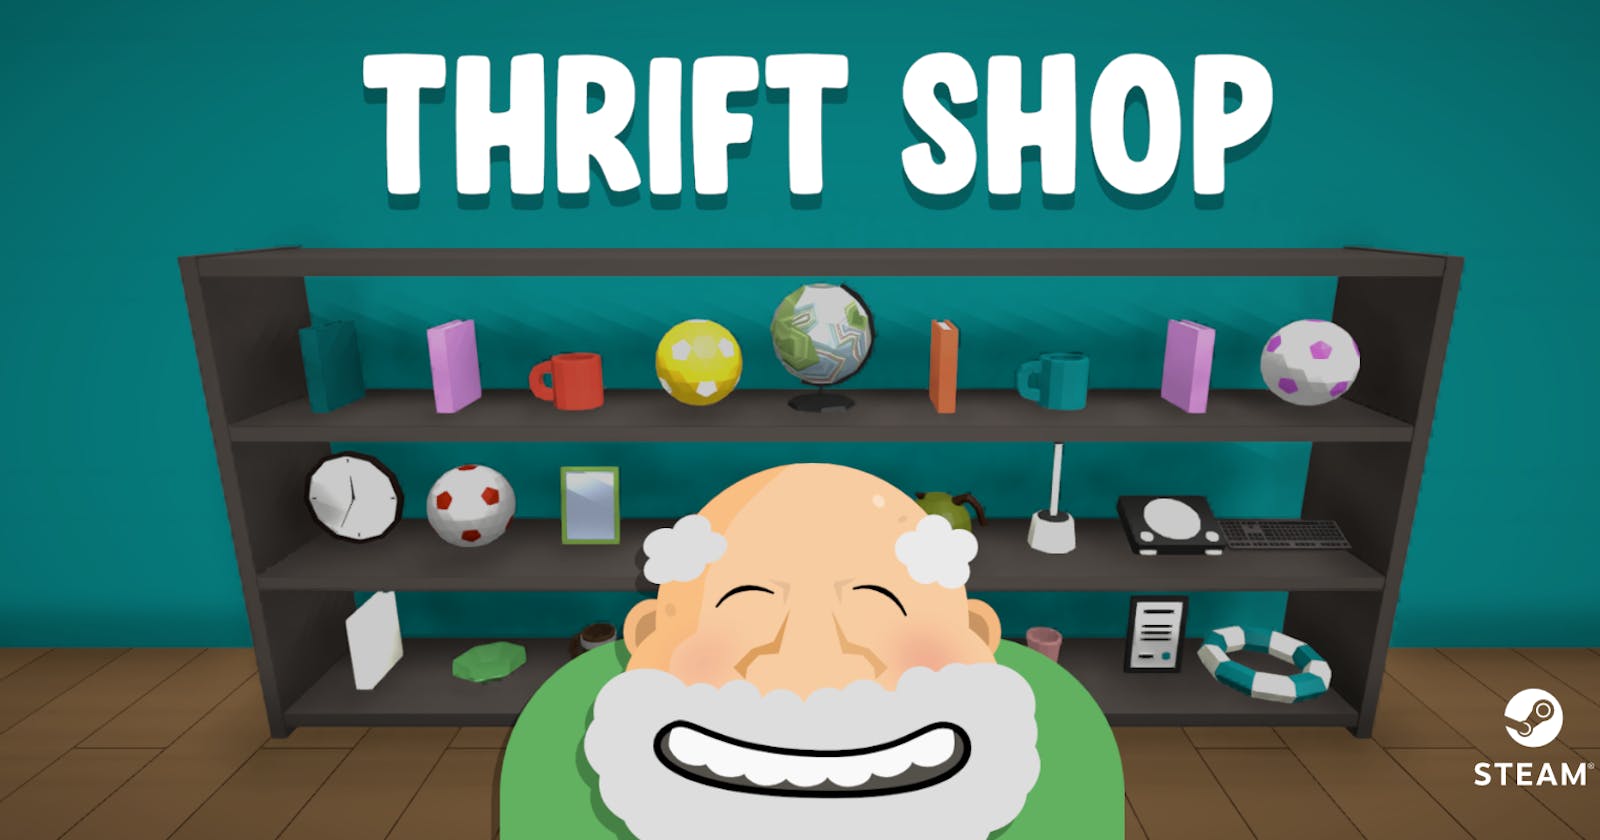 Thrift Shop Coming Soon